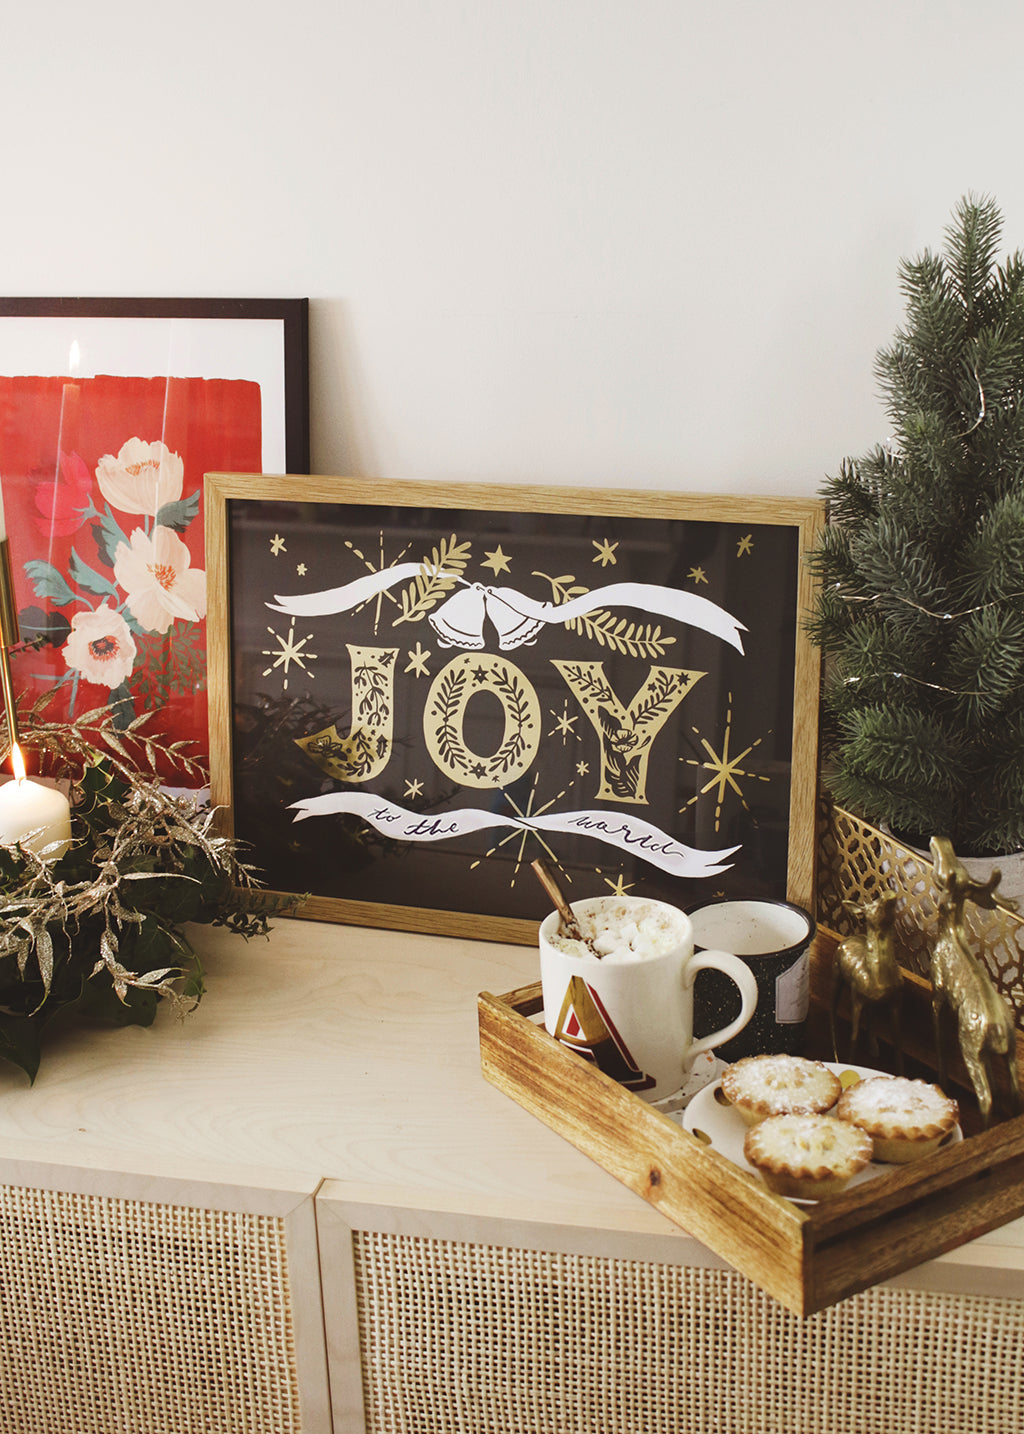 Navy Christmas Print With Gold Joy Lettering And Stars In An Oak Frame With Tray Of Mince Pies And Hot Chocolate - Annie Dornan Smith